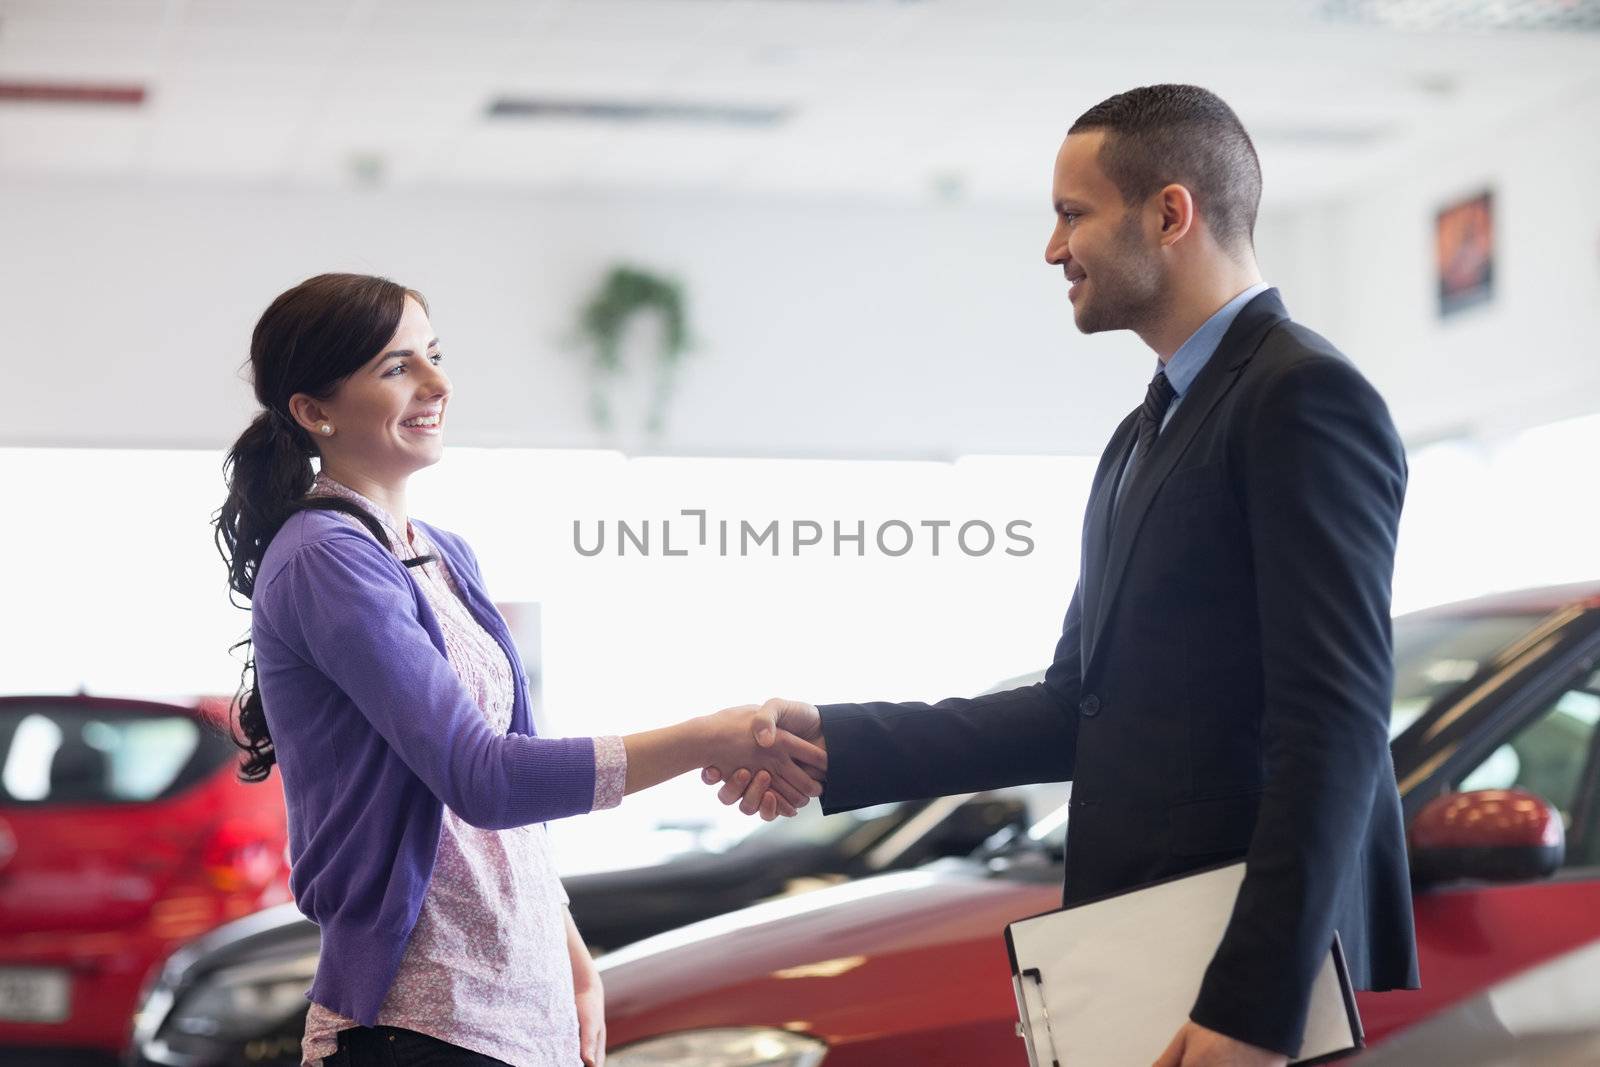 Salesman and a woman shaking hands in a car shop